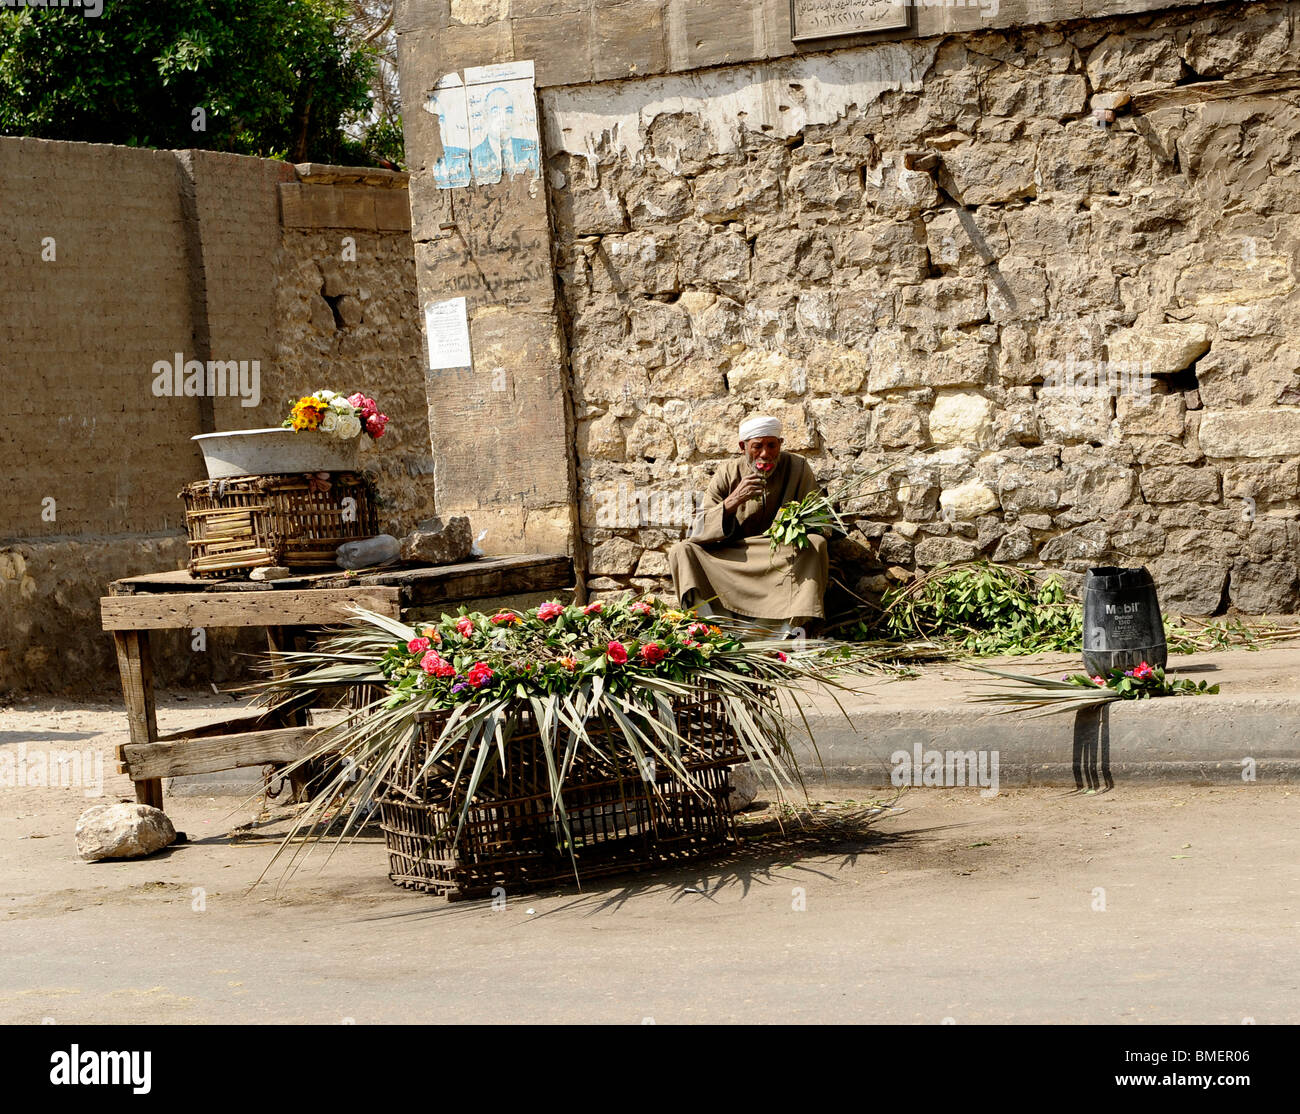 old man selling flowers , souk goma (friday market), street market, Southern Cemeteries, Khalifa district ,cairo Stock Photo